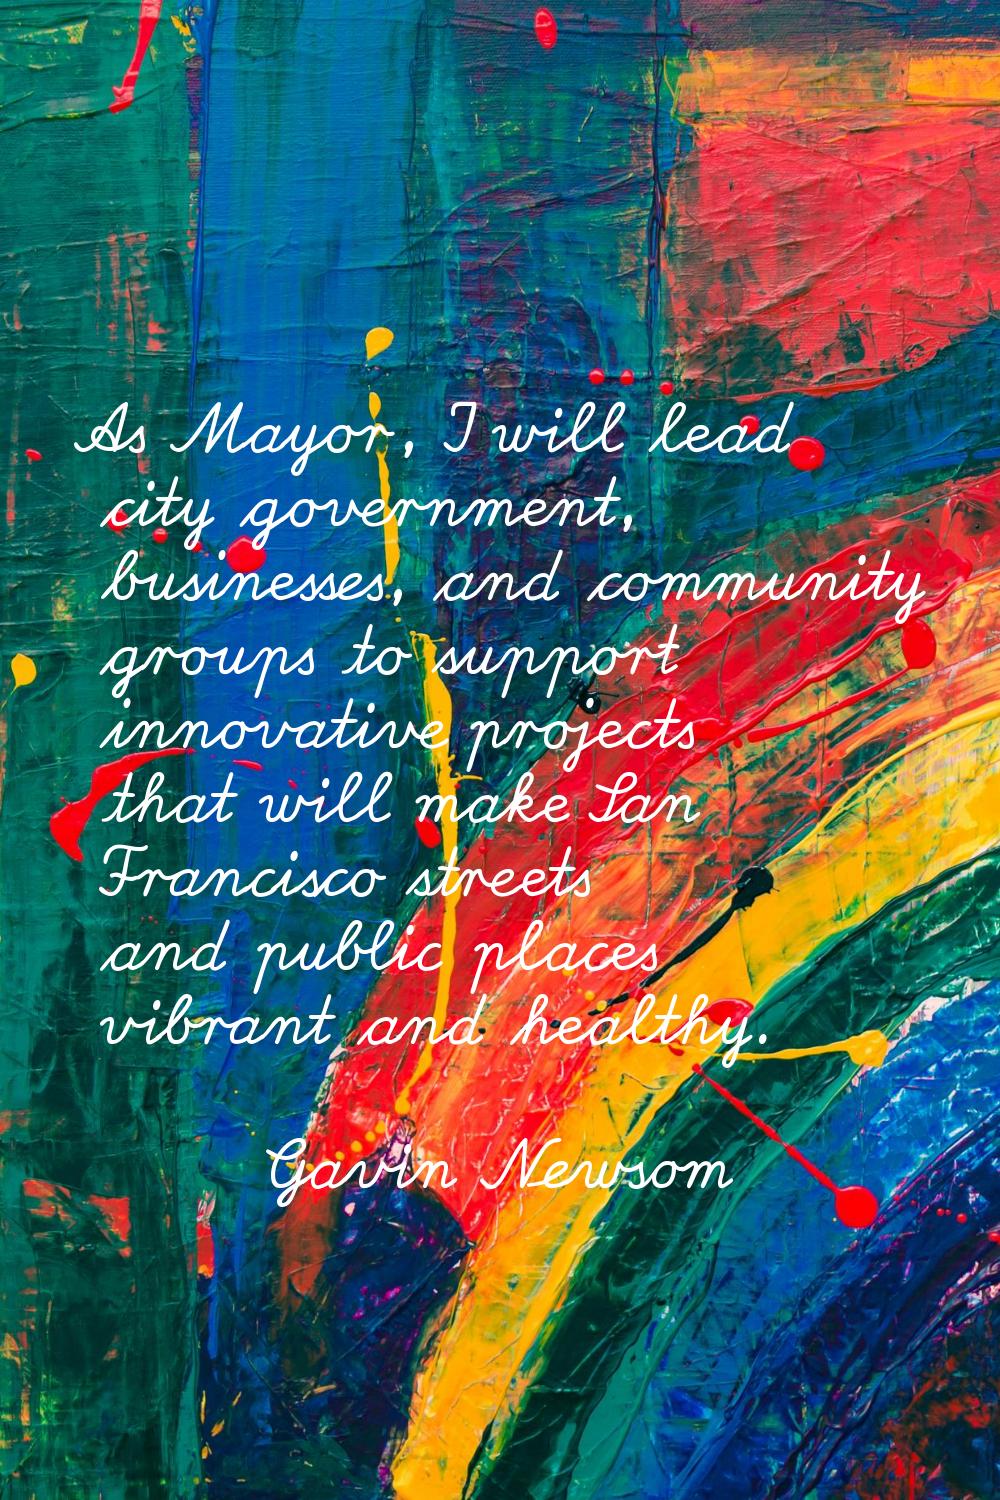 As Mayor, I will lead city government, businesses, and community groups to support innovative proje